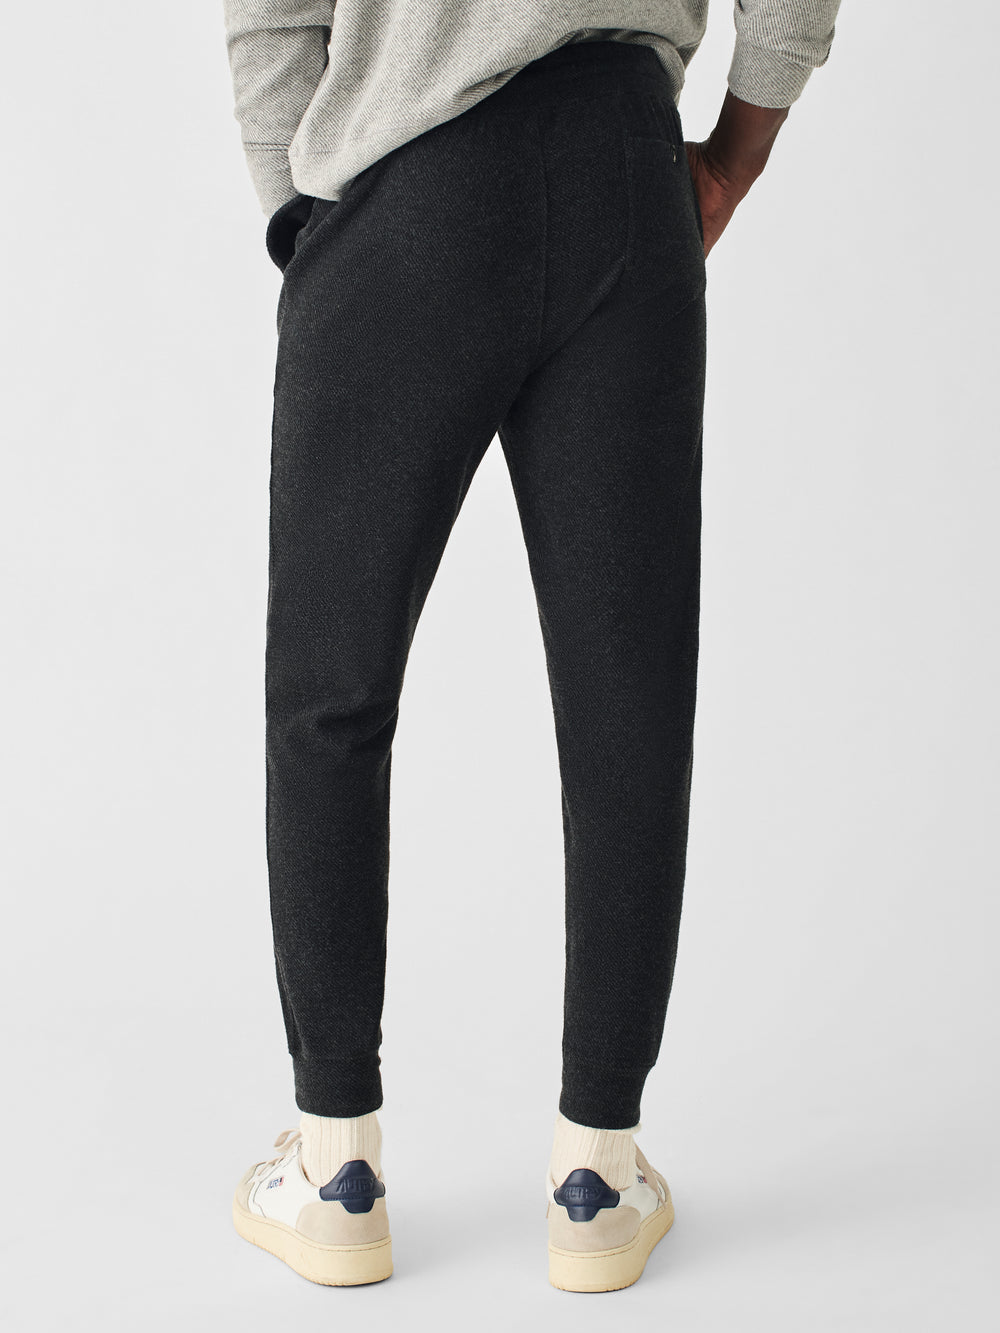 LEGEND SWEATPANT-HEATHERED BLACK TWILL - Kingfisher Road - Online Boutique